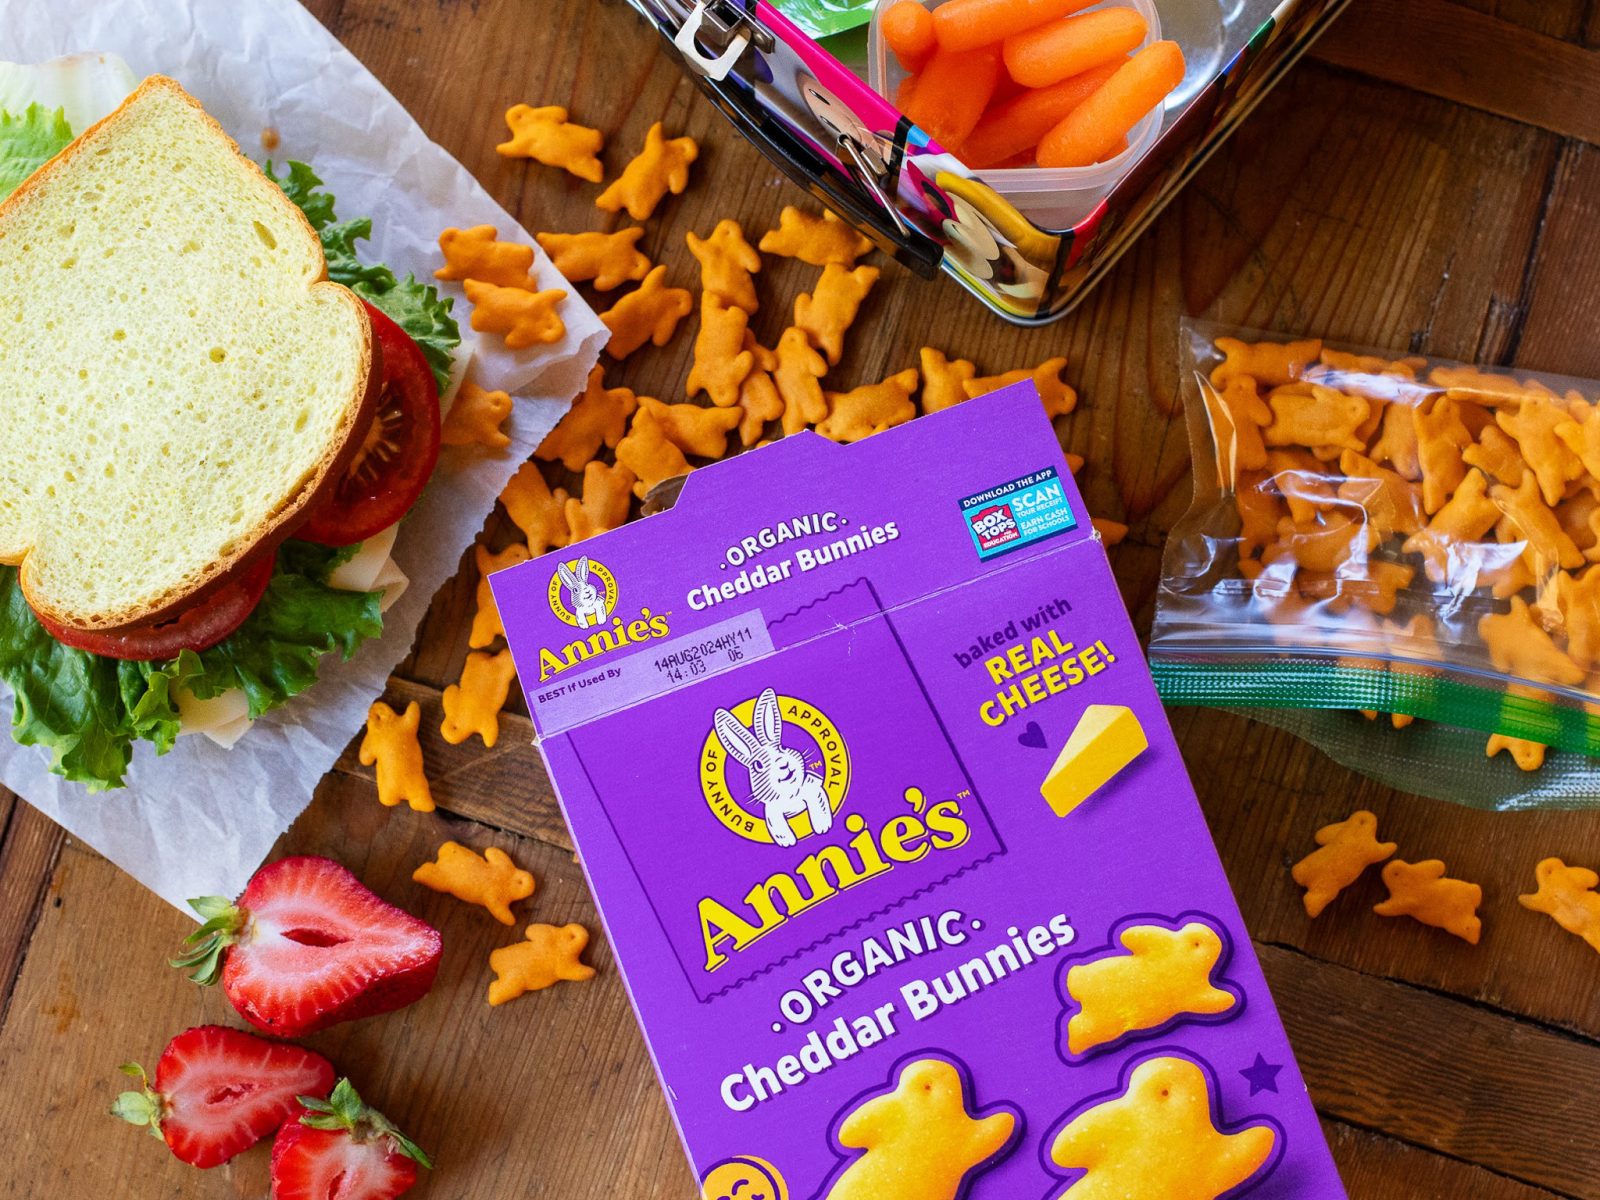 Annie’s Cheddar Crackers As Low As $2.29 At Kroger – Less Than Half Price